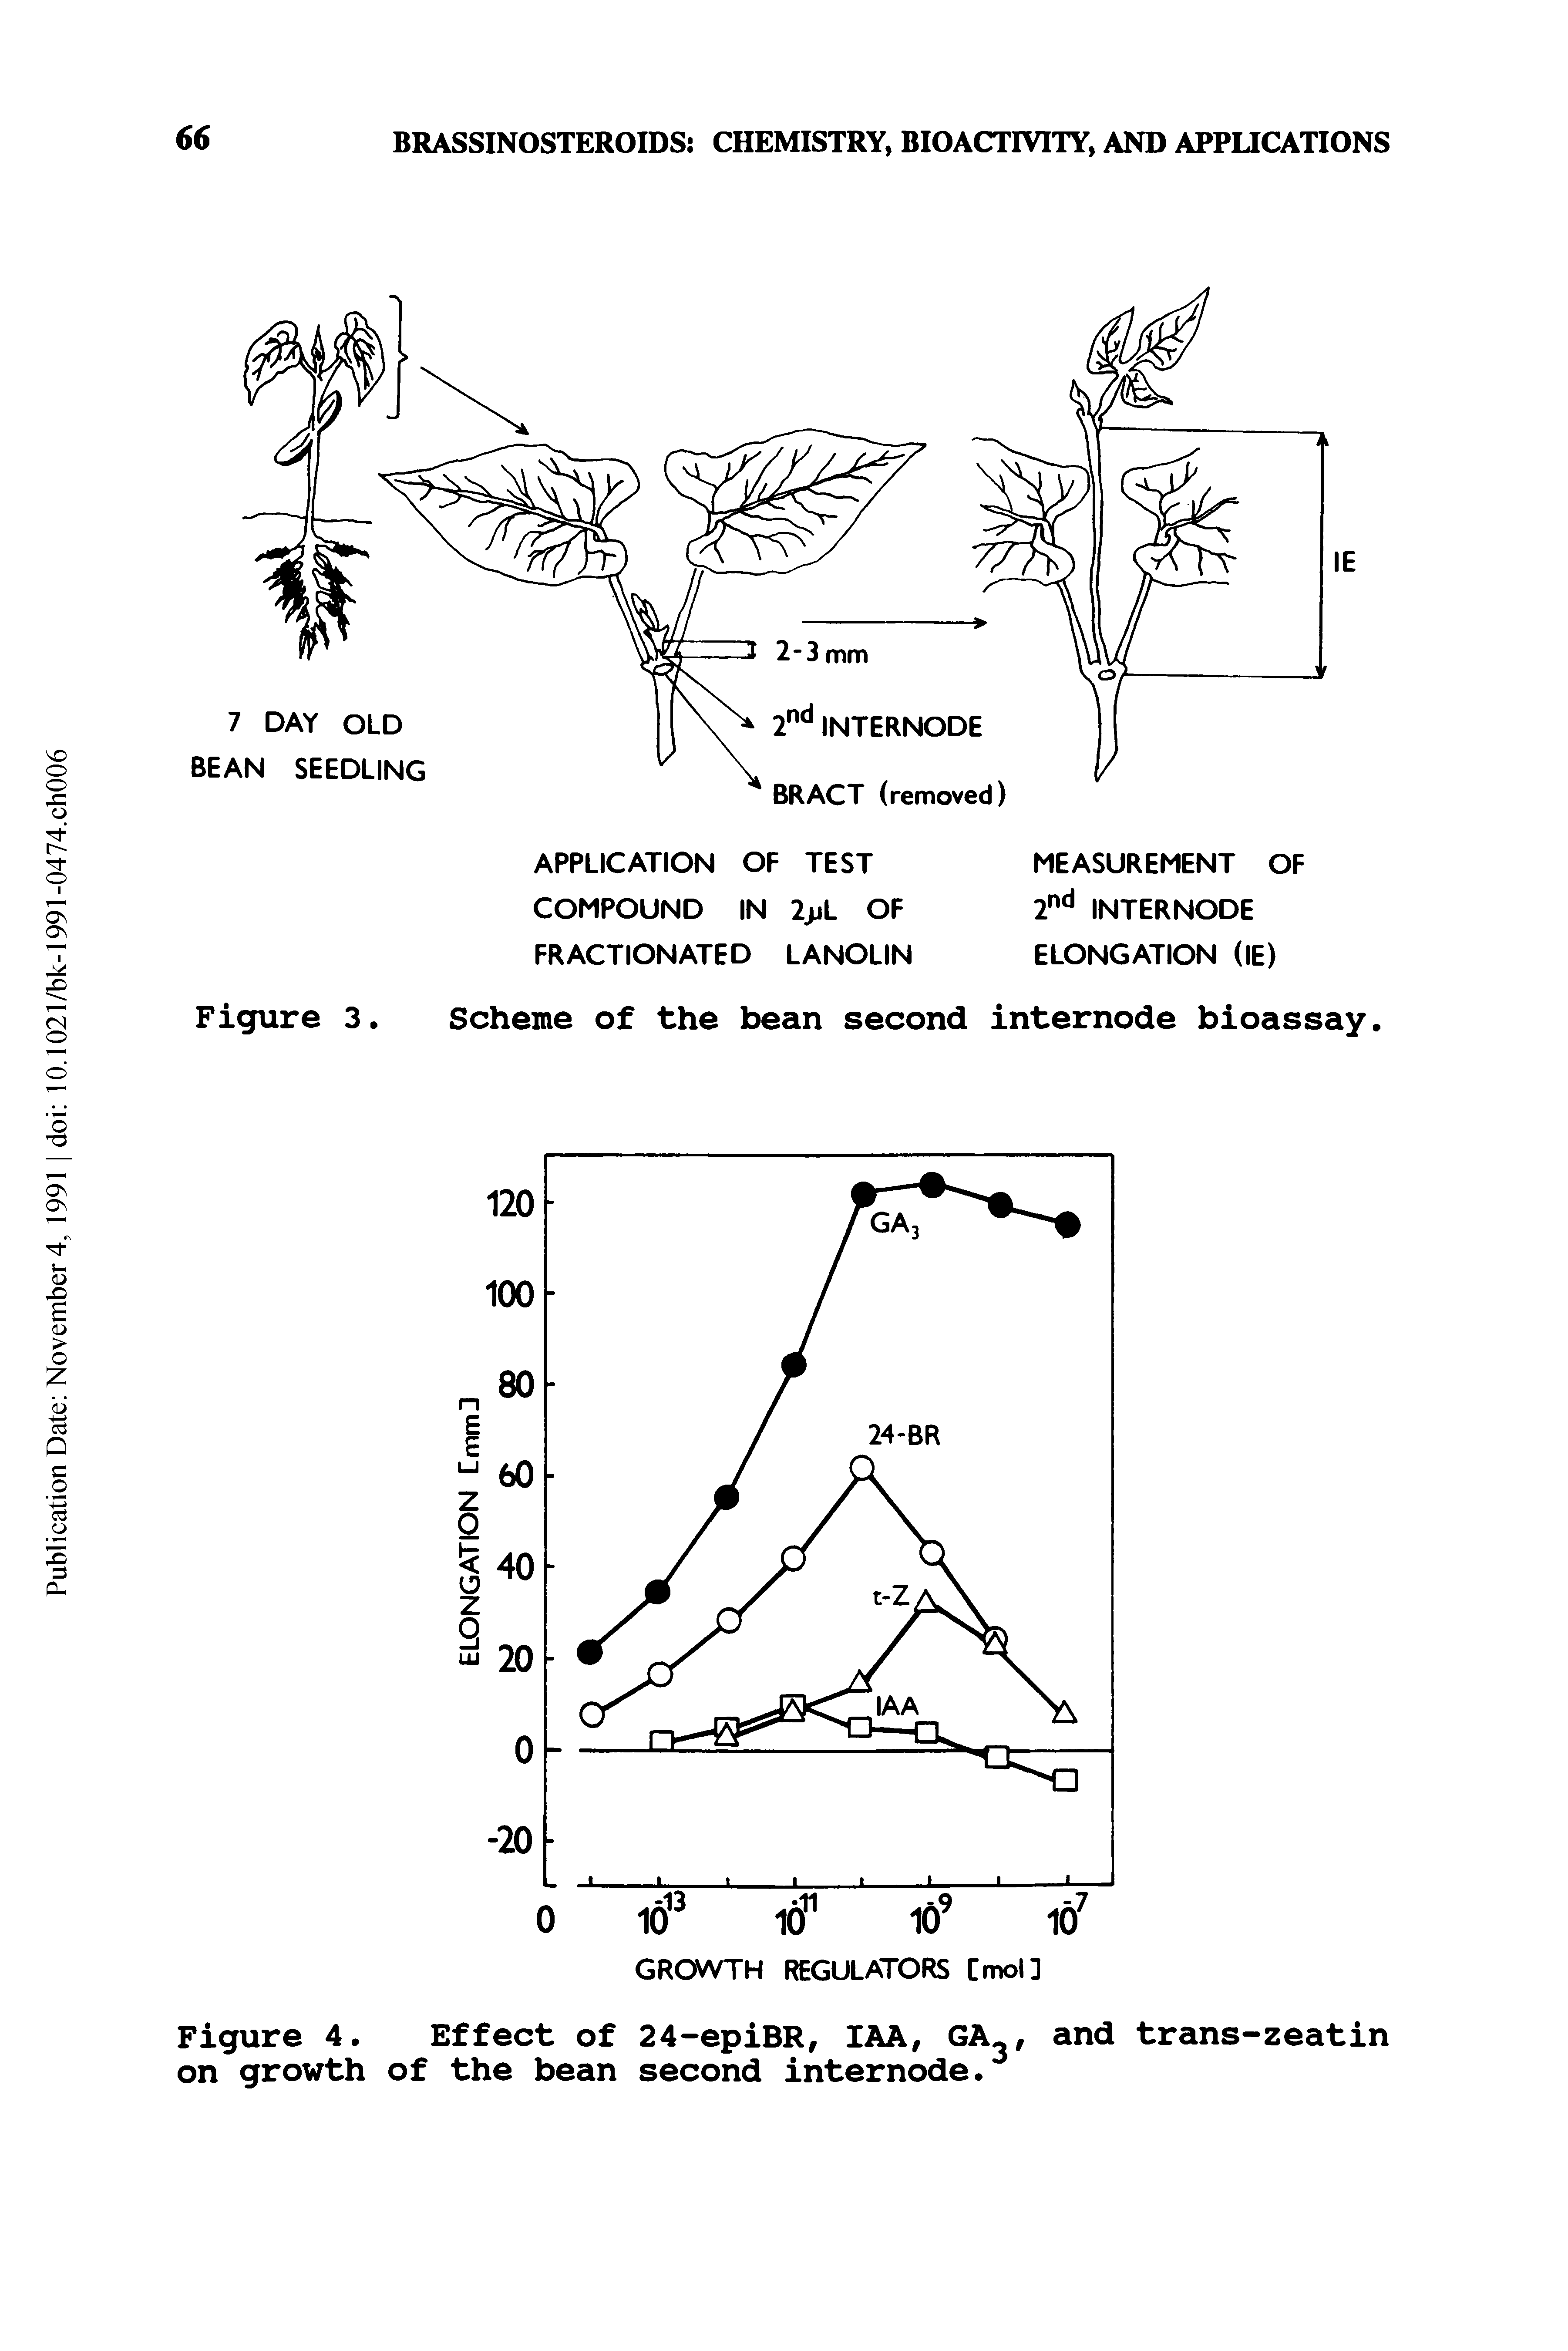 Figure 4. Effect of 24-epiBR, IAA, GA, and trans-zeatin on growth of the bean second internode.